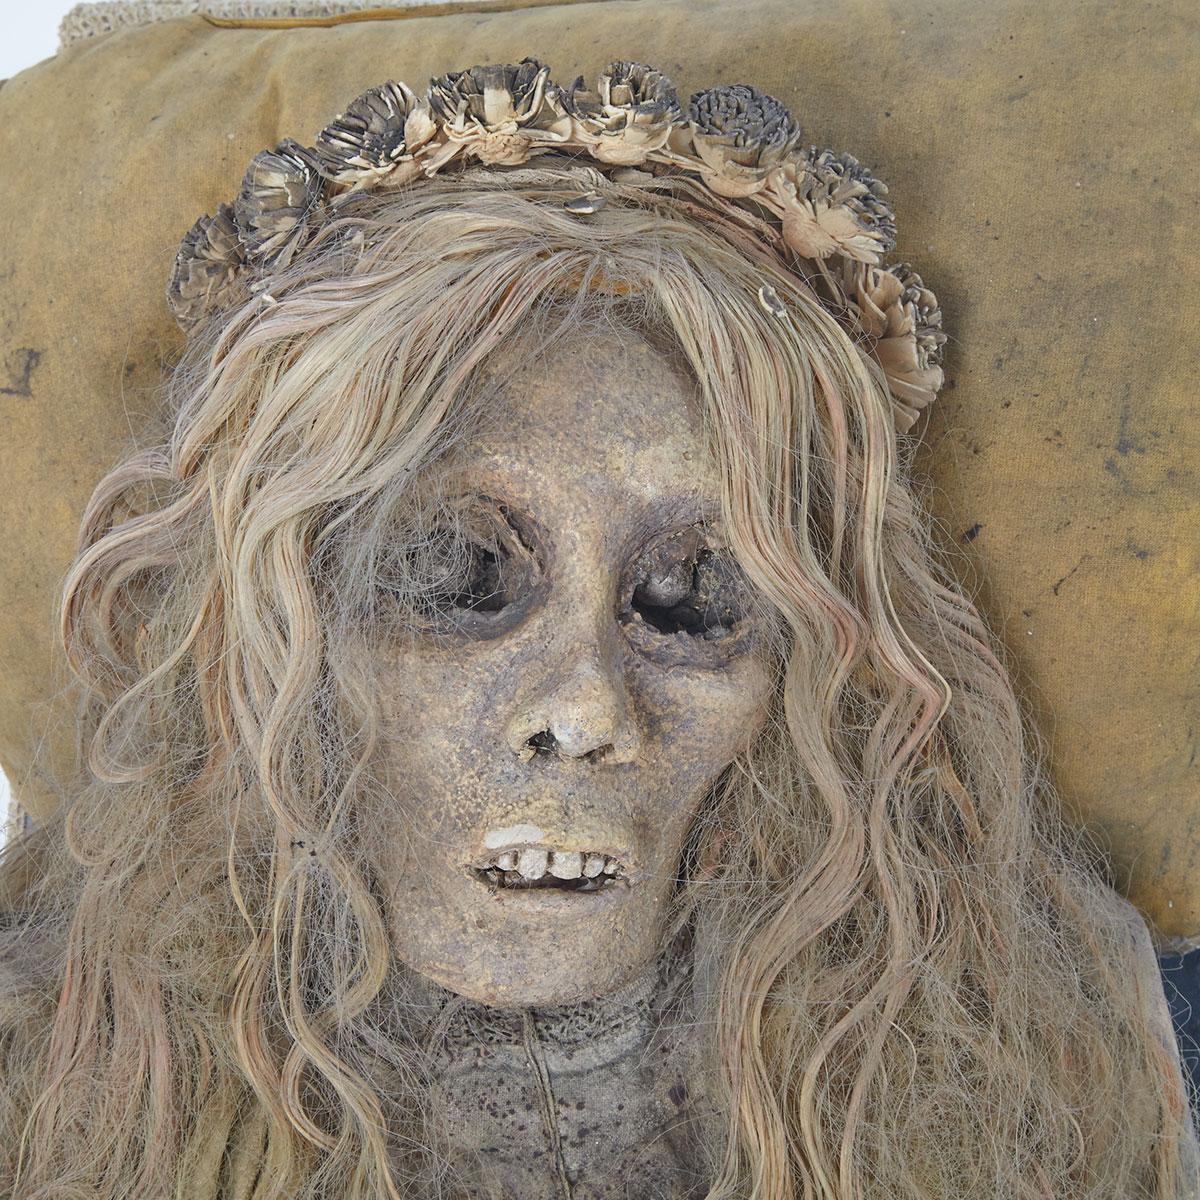 Sideshow Gaff of a Corpse Bride, 20th century